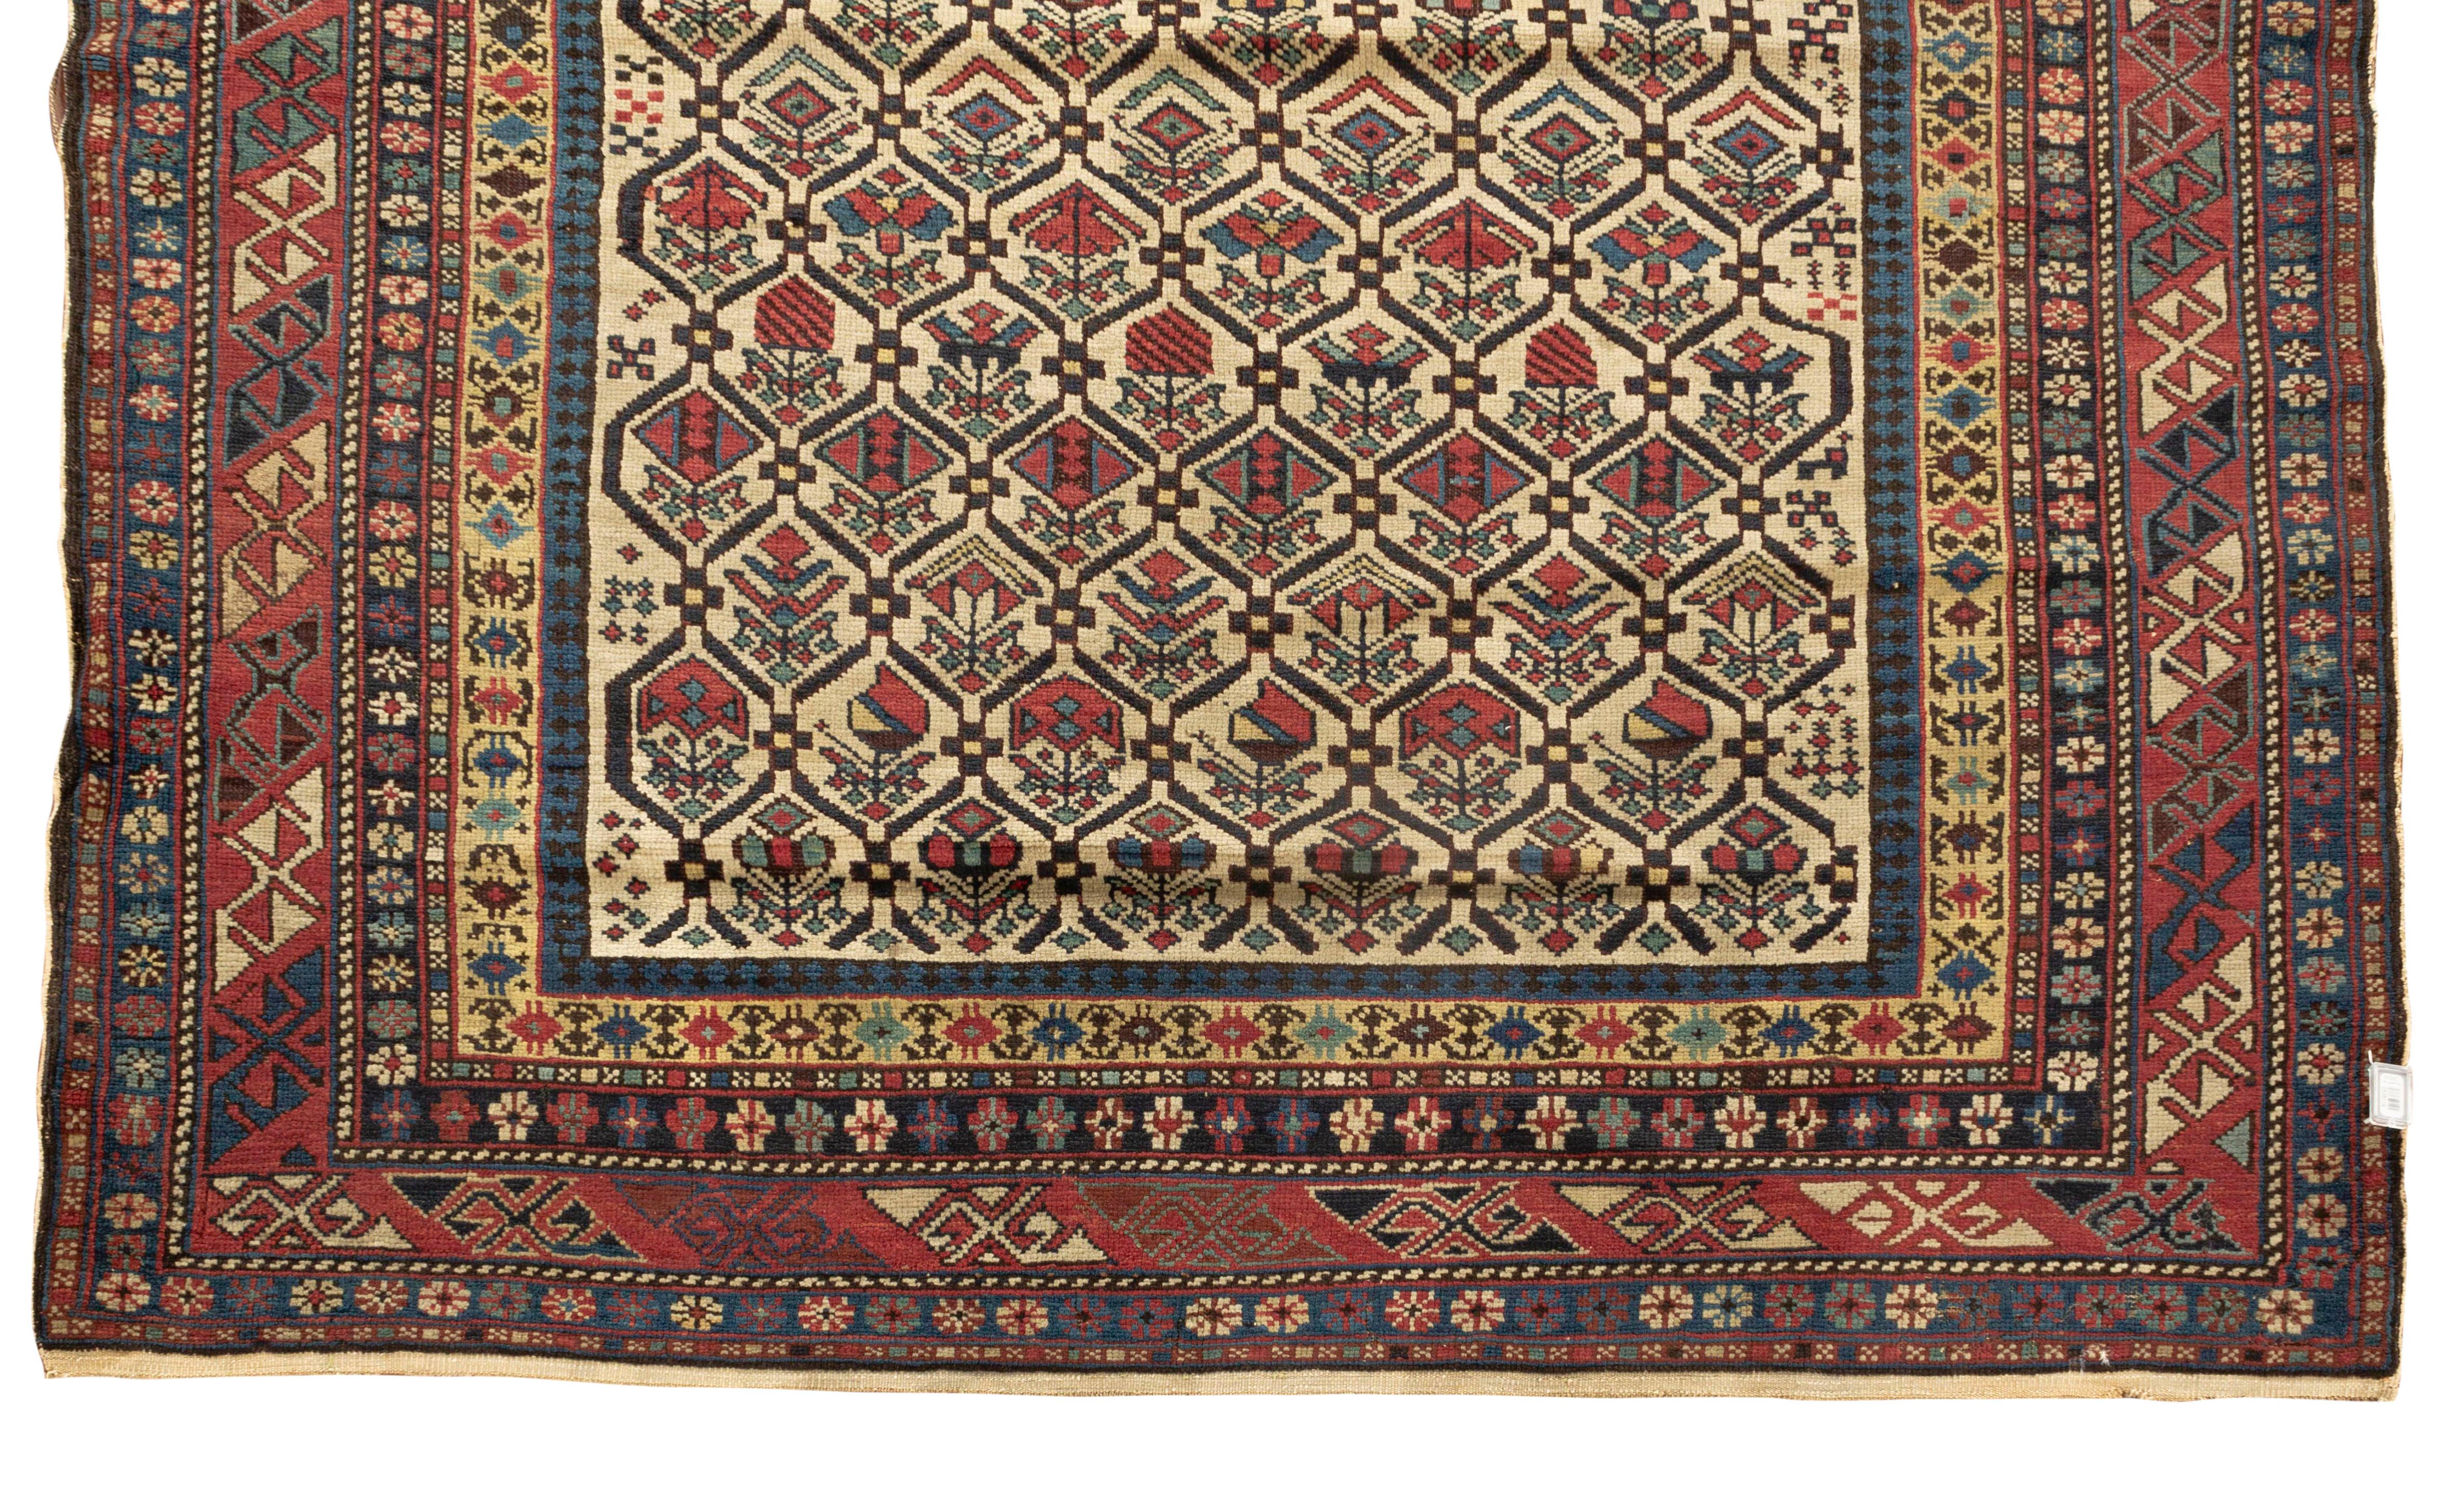 An antique circa 1880 Caucasian Dagestan rug, Dagestan is located inside Russia in the North of Caucasia, up until the 19th century it fell under the control of Persia, so the Persian influence can be seen in the weavings although they are of course